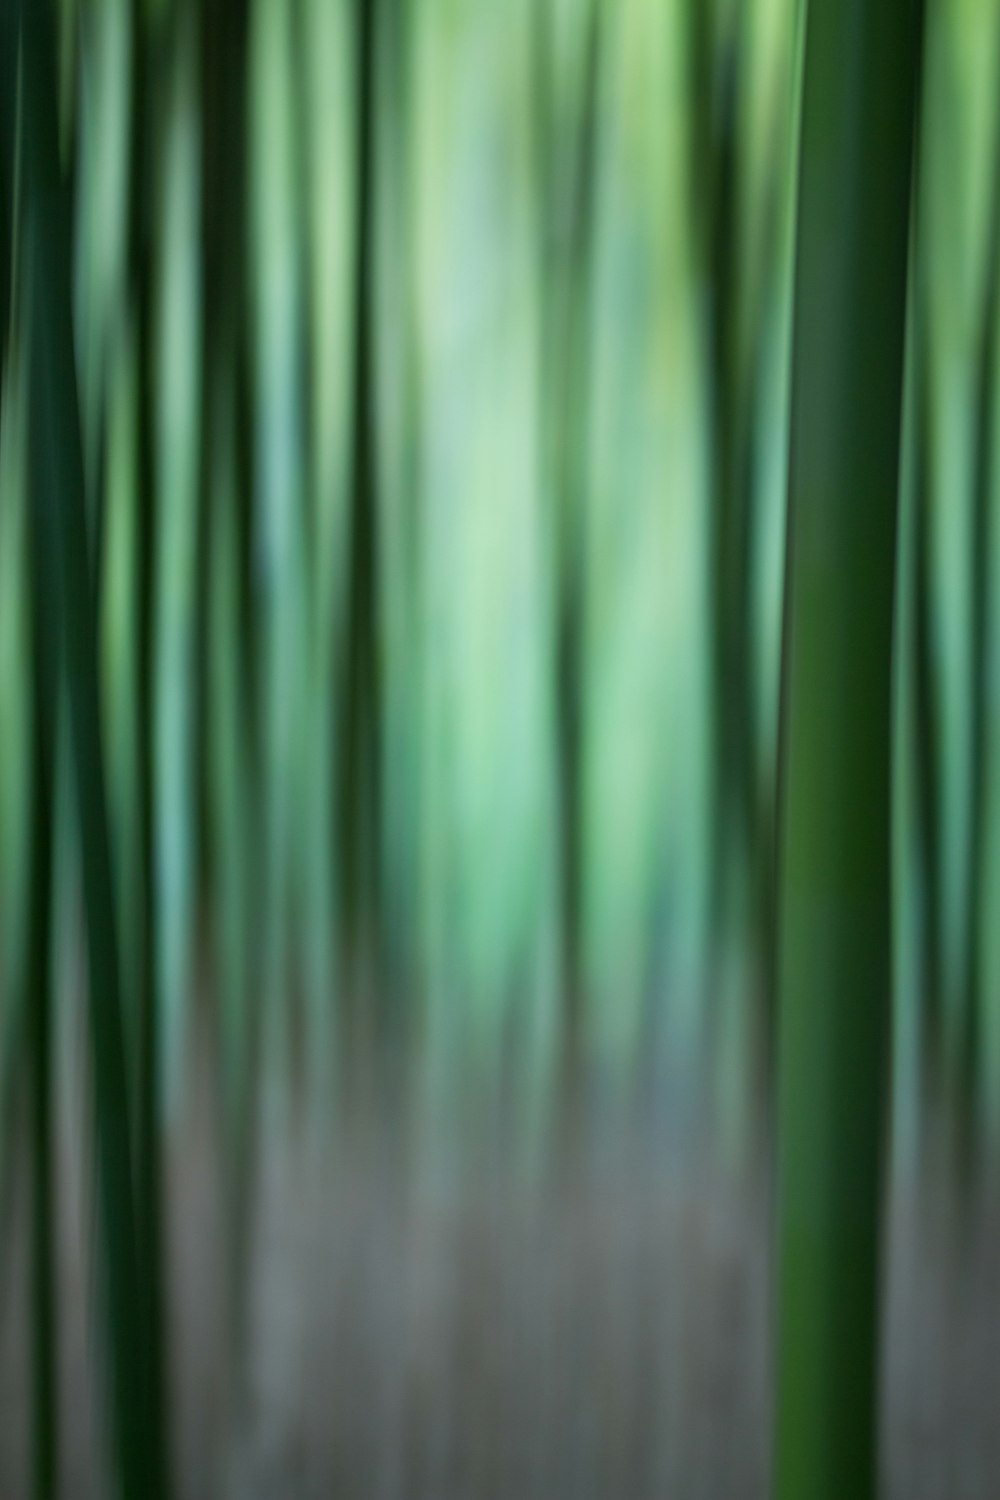 a blurry photo of a bamboo tree